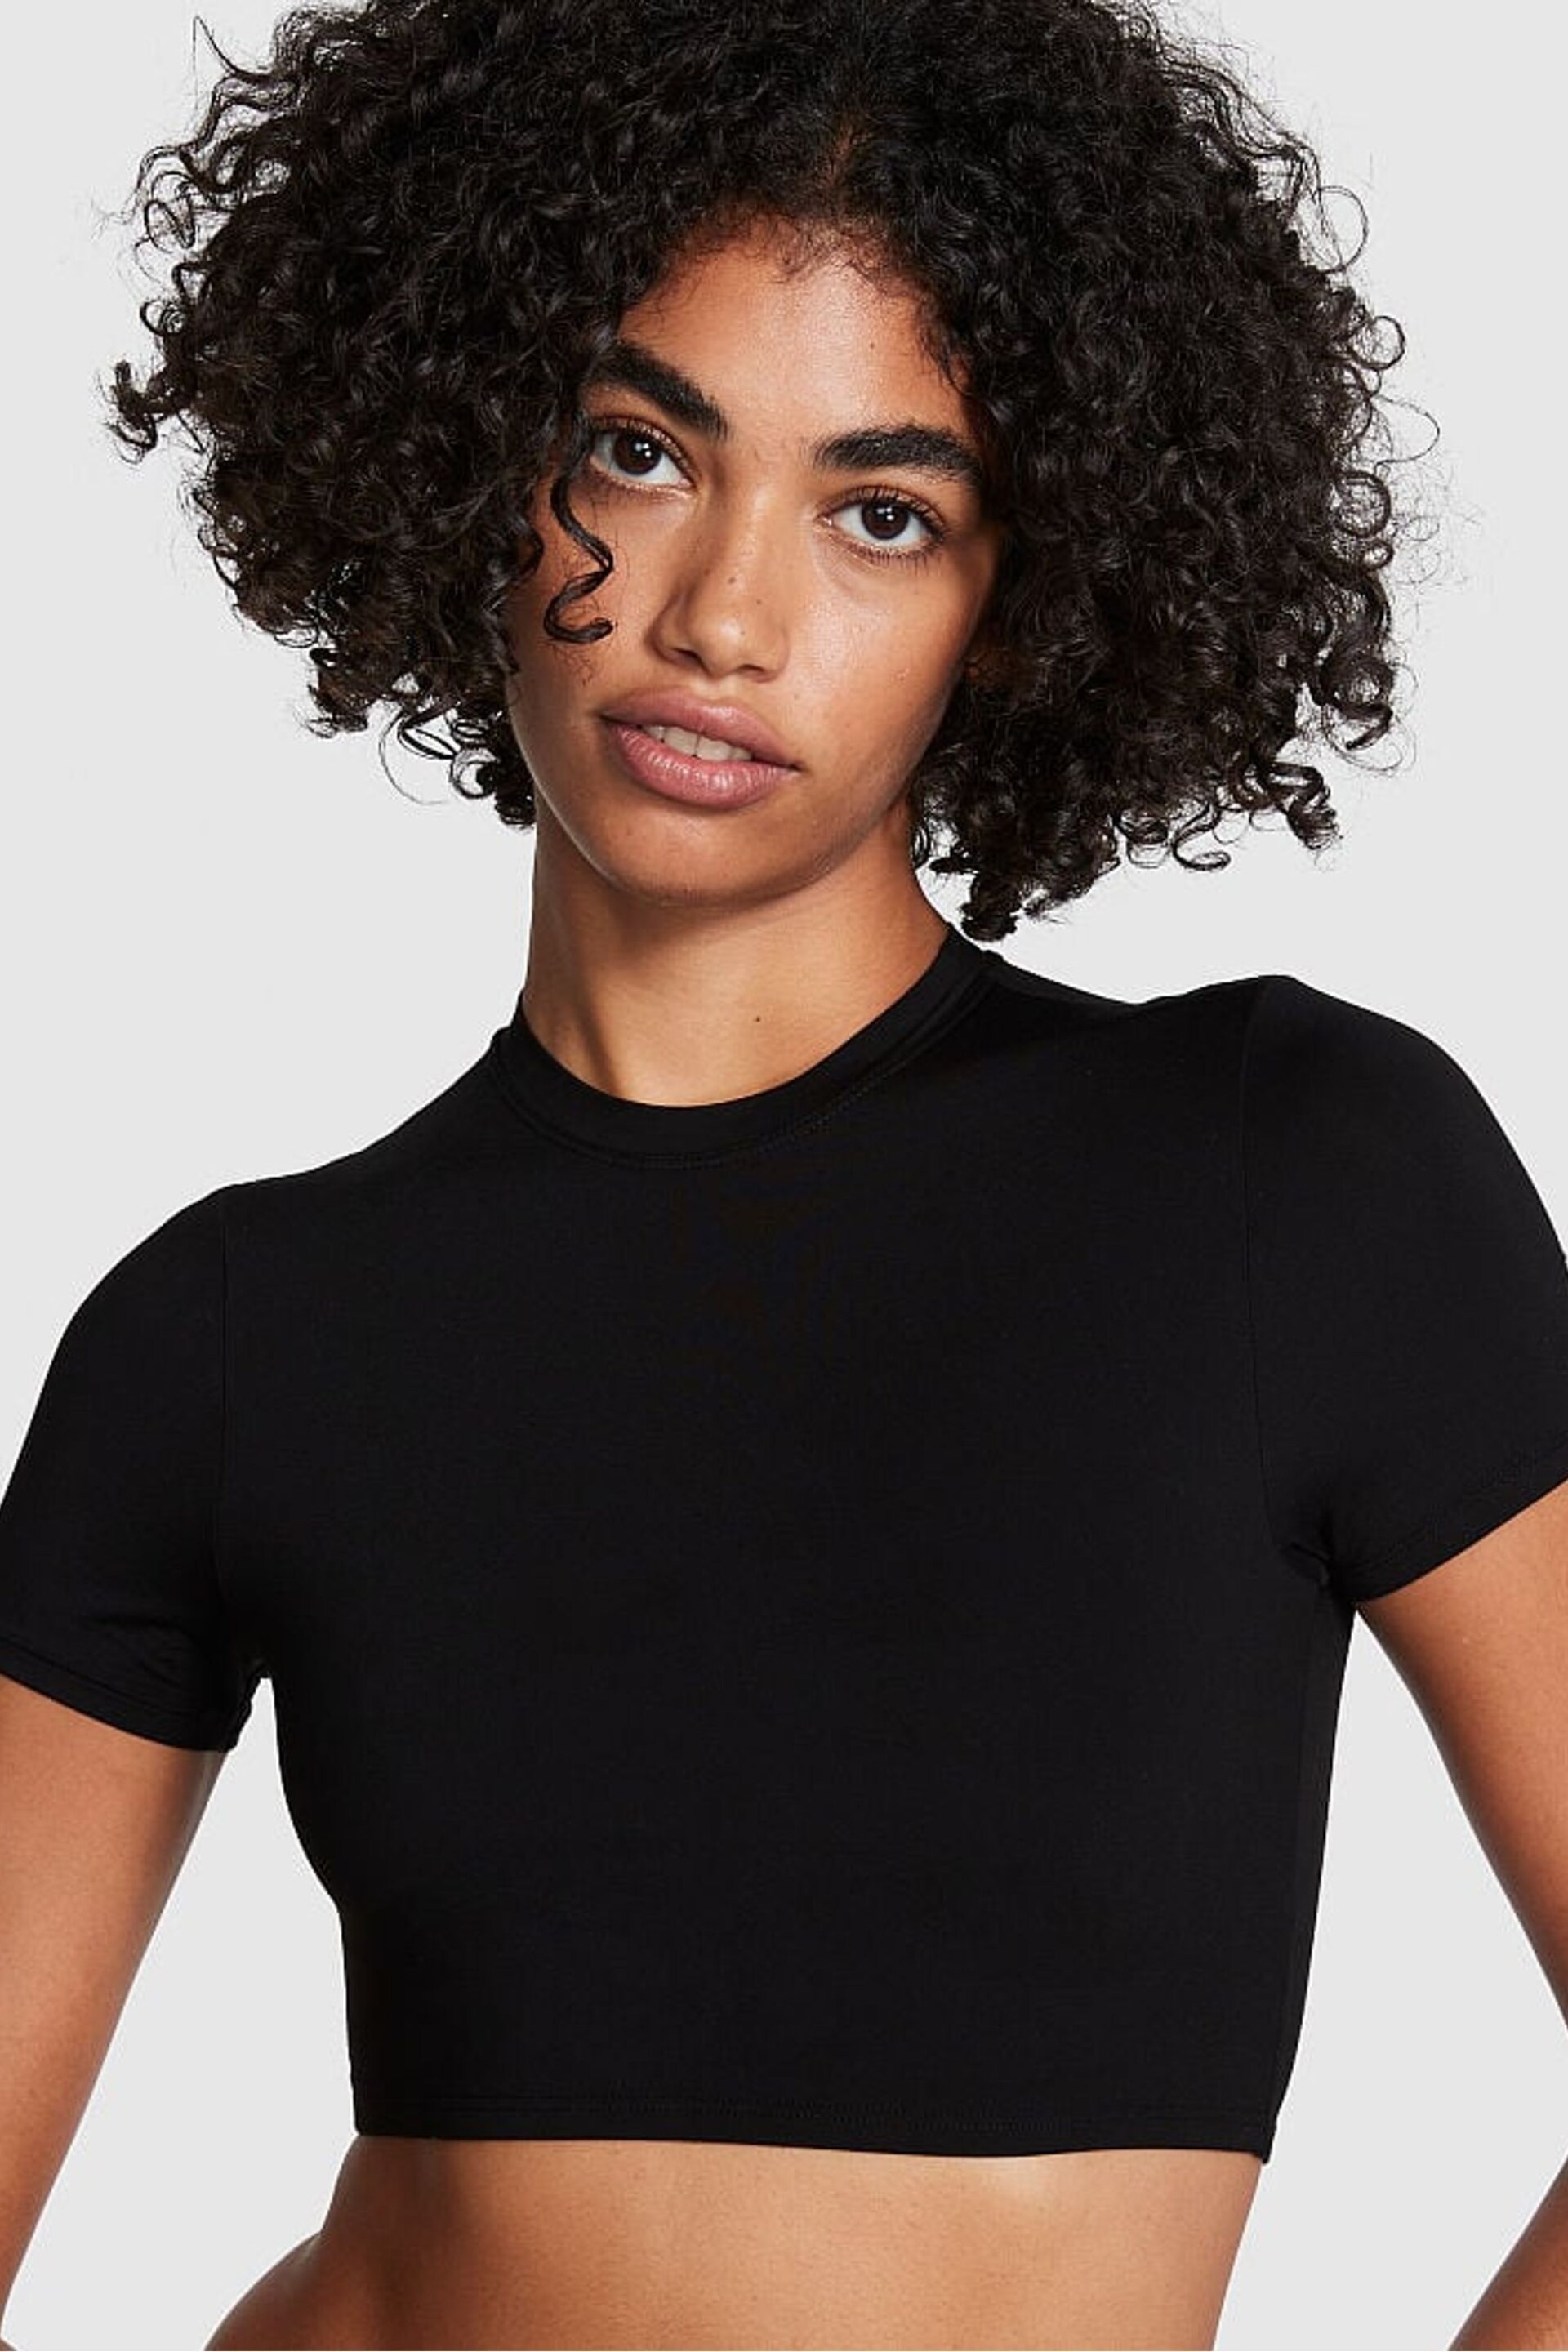 Victoria's Secret PINK Pure Black Soft Stretch Cropped T-Shirt - Image 1 of 4